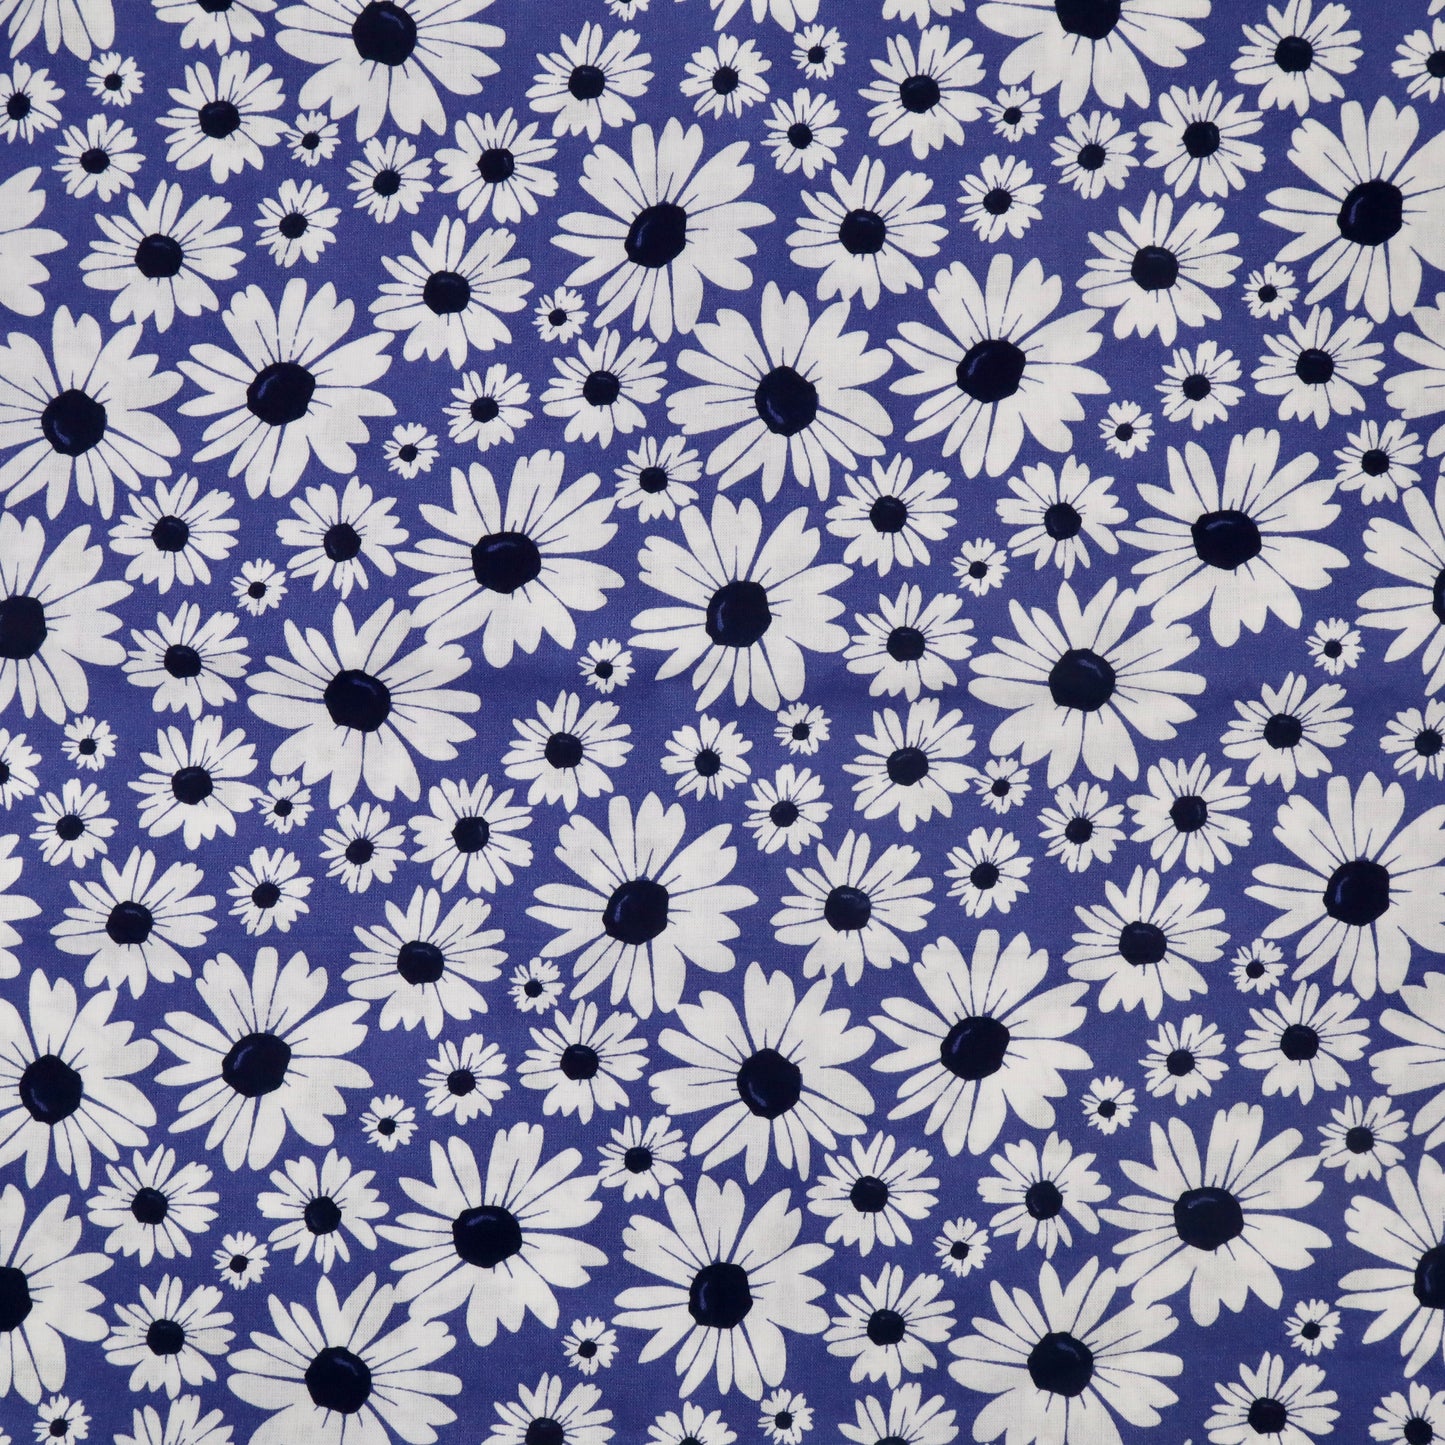 Blue Daisies - Quilting Cotton